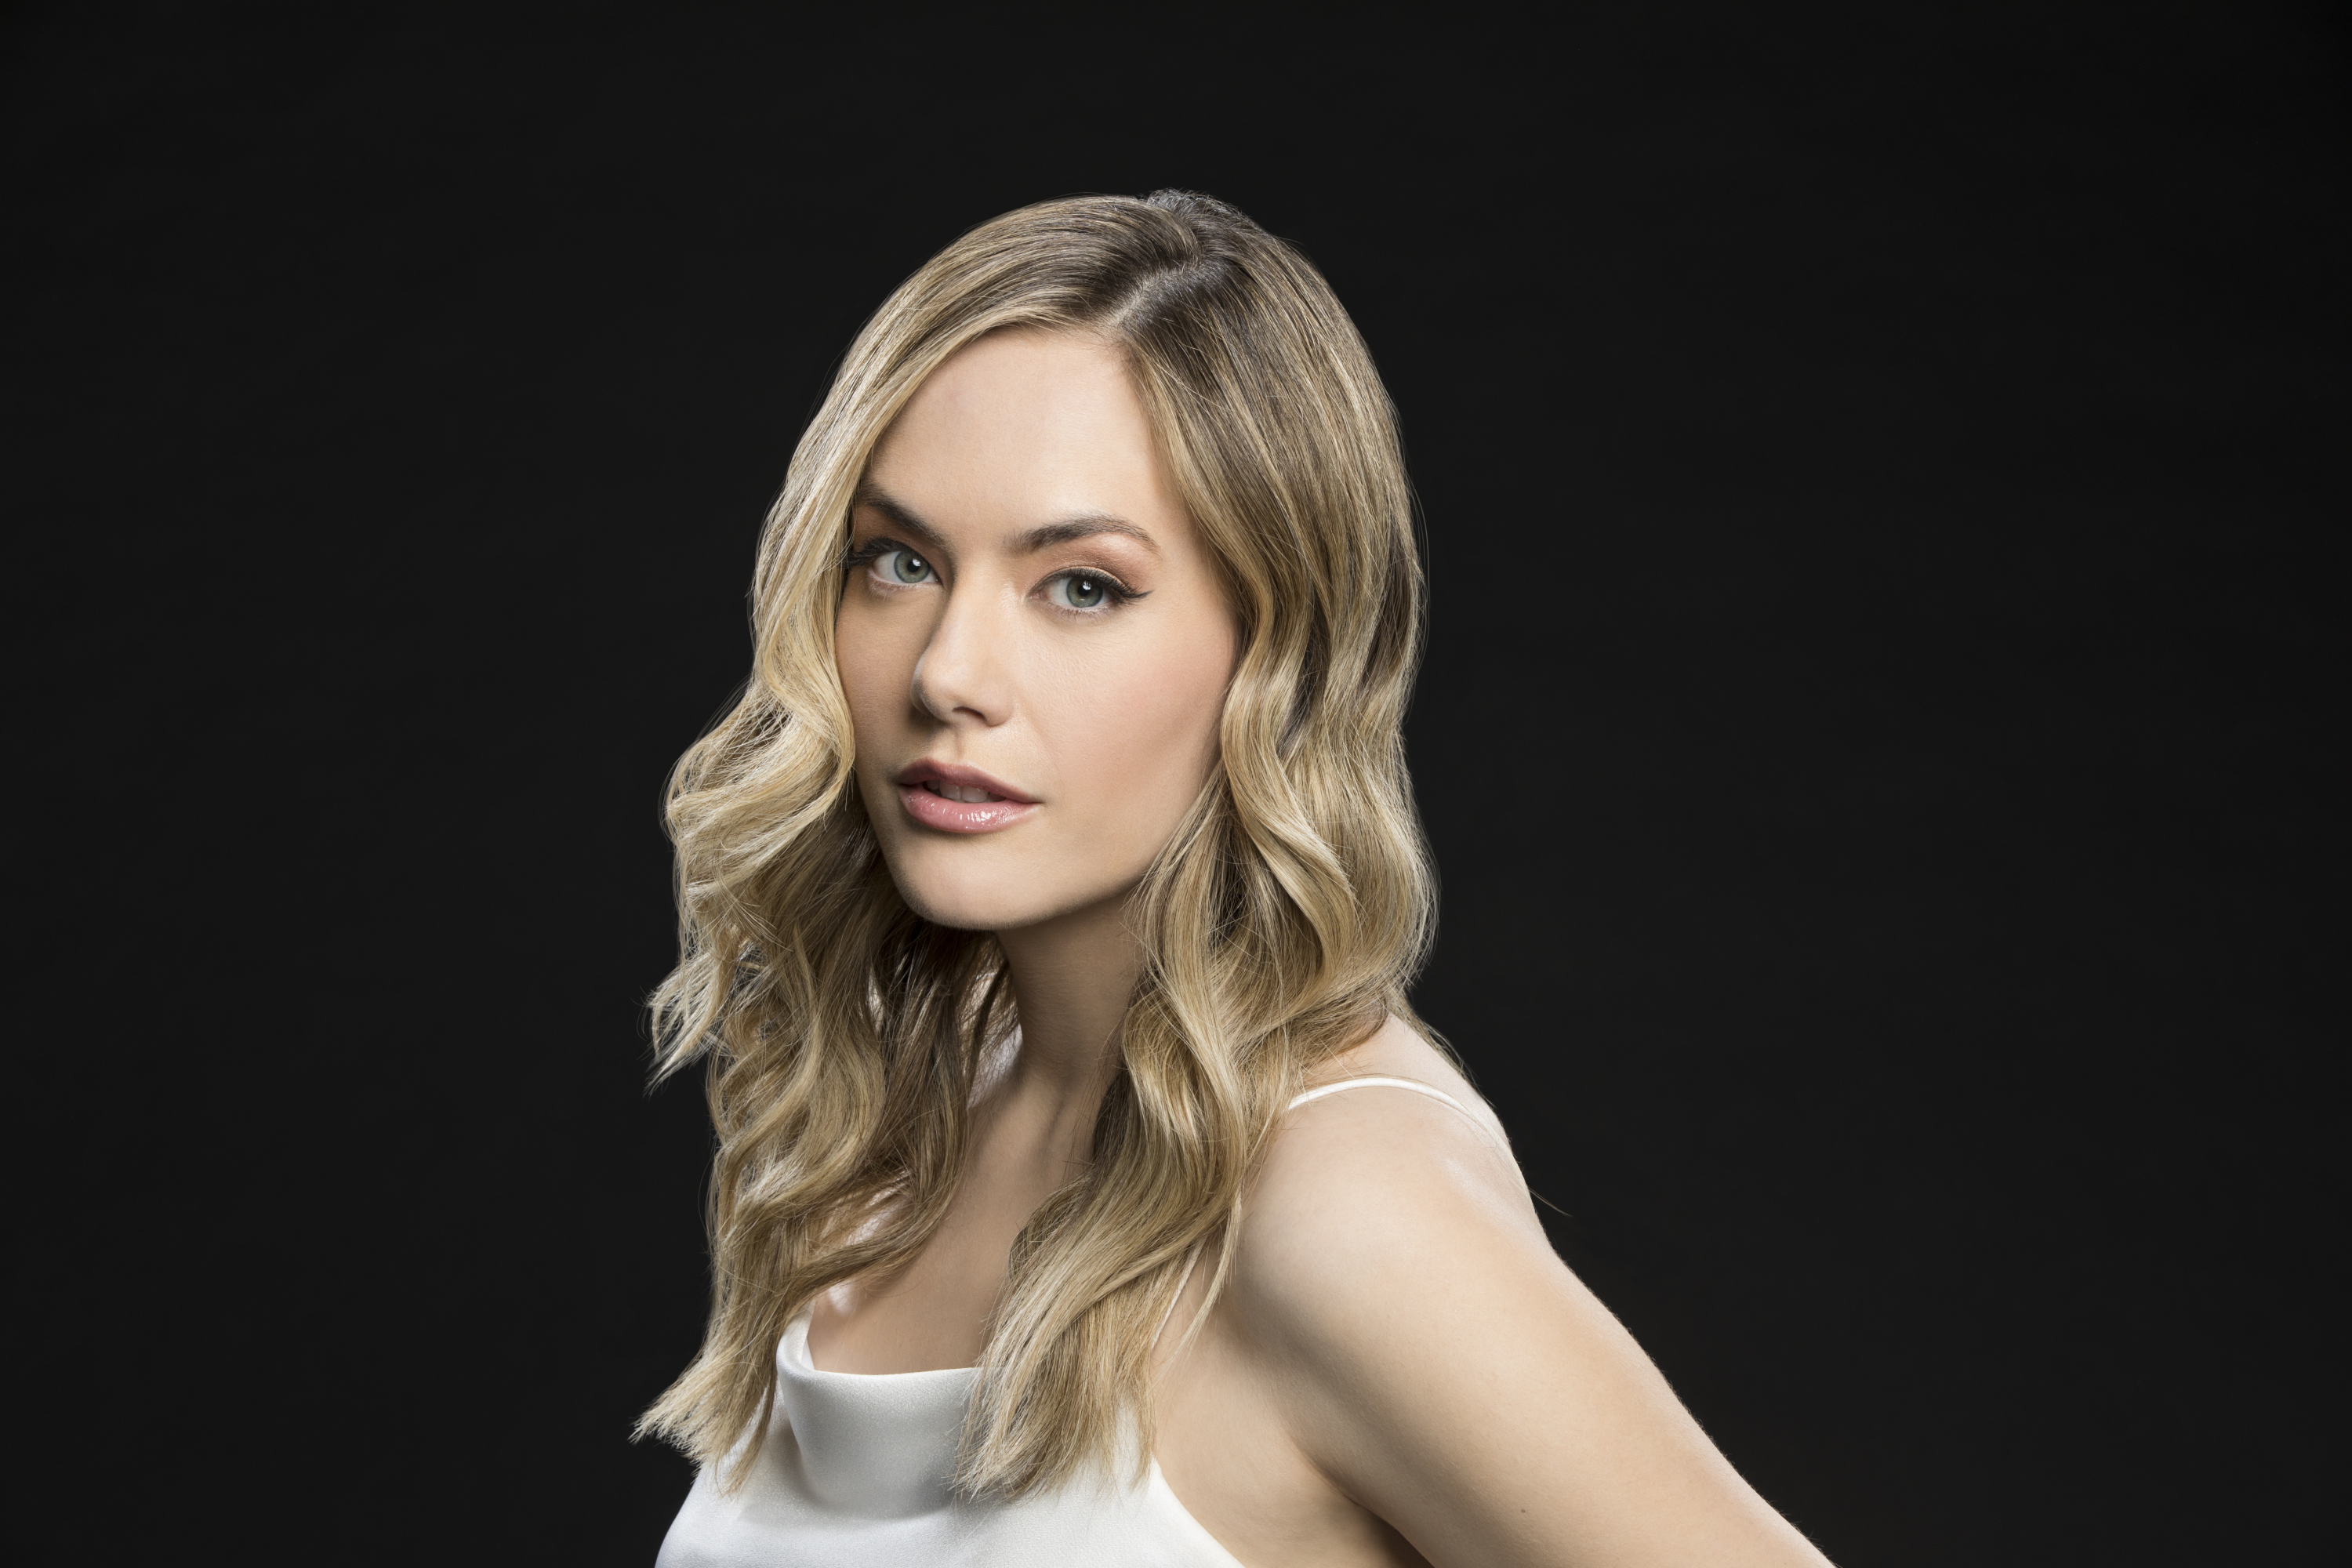 'The Bold and the Beautiful' actor Annika Noelle wears a white dress in a  promotional photoshoot for the CBS soap opera.